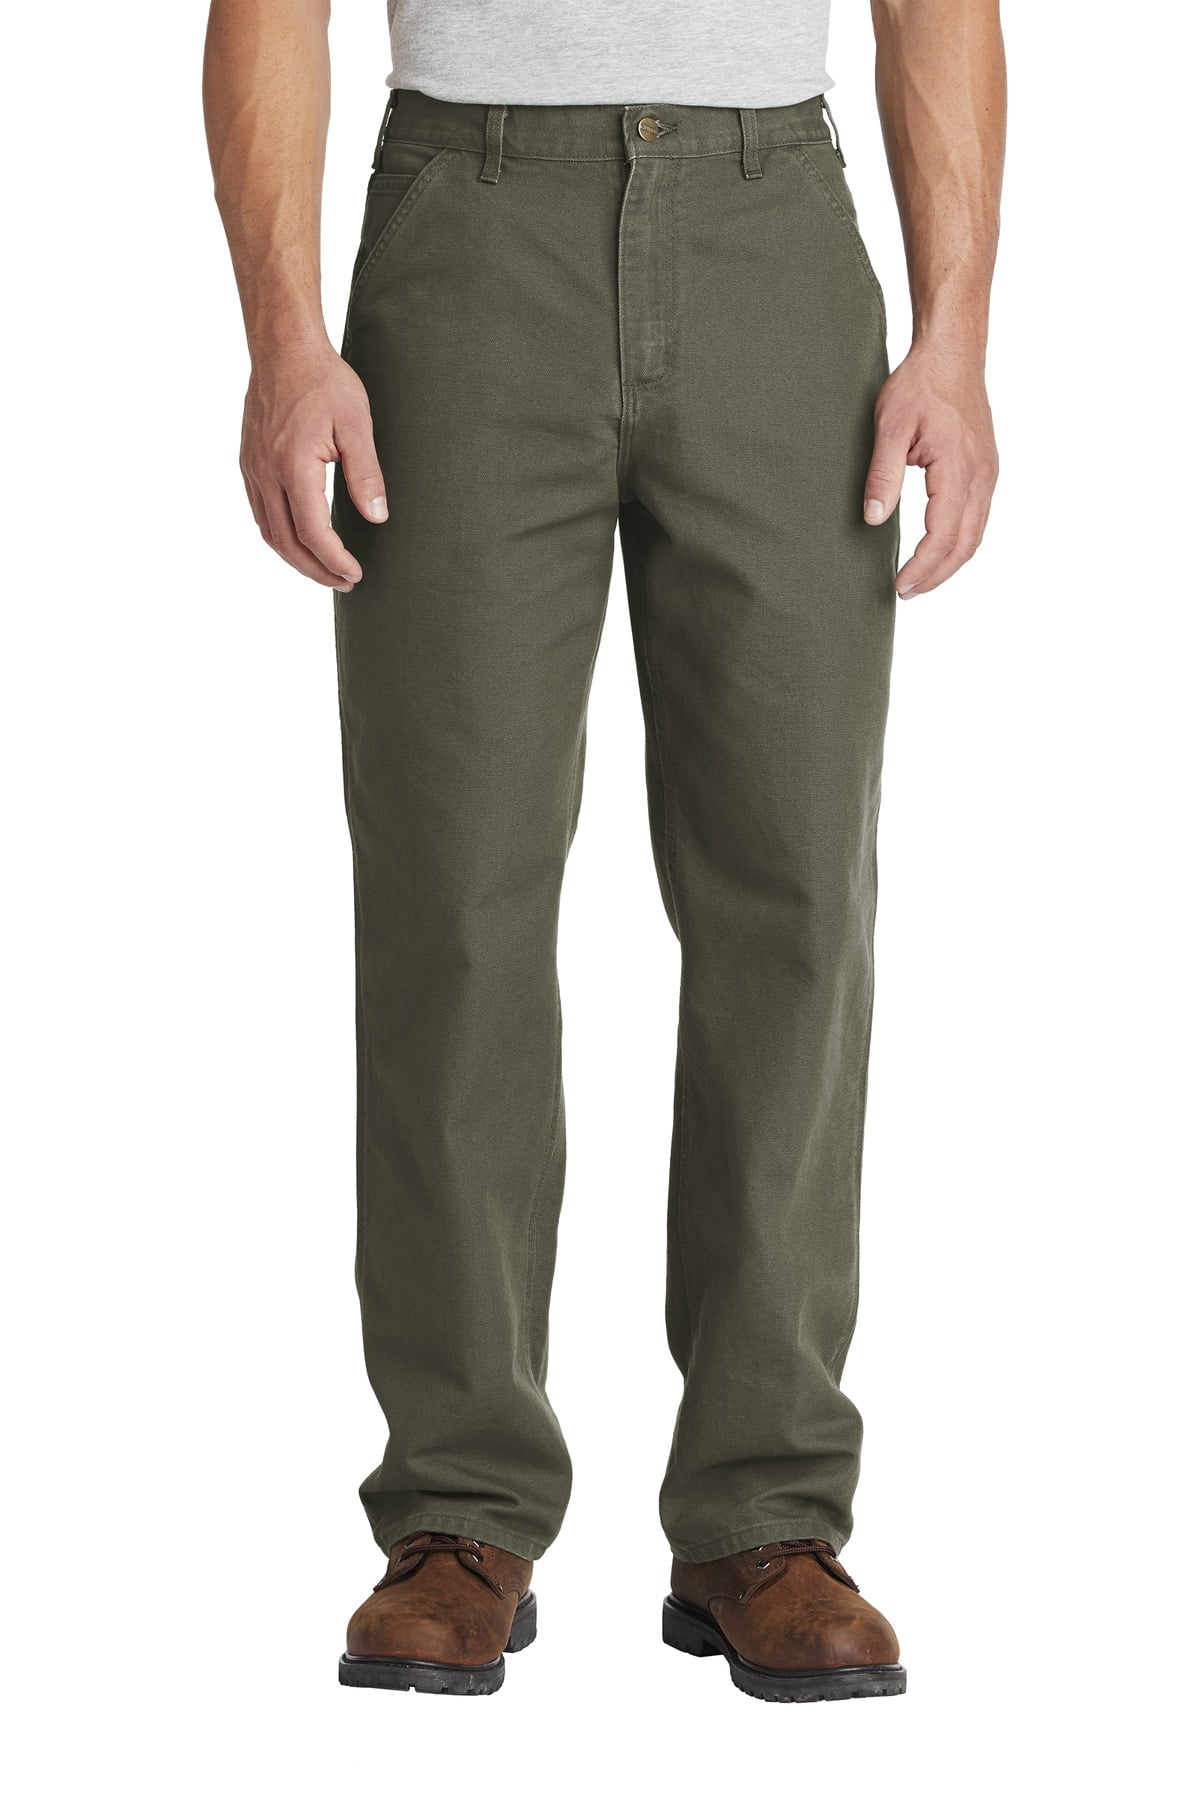 Carhartt Men's Washed Duck Work Dungaree Utility Pant 